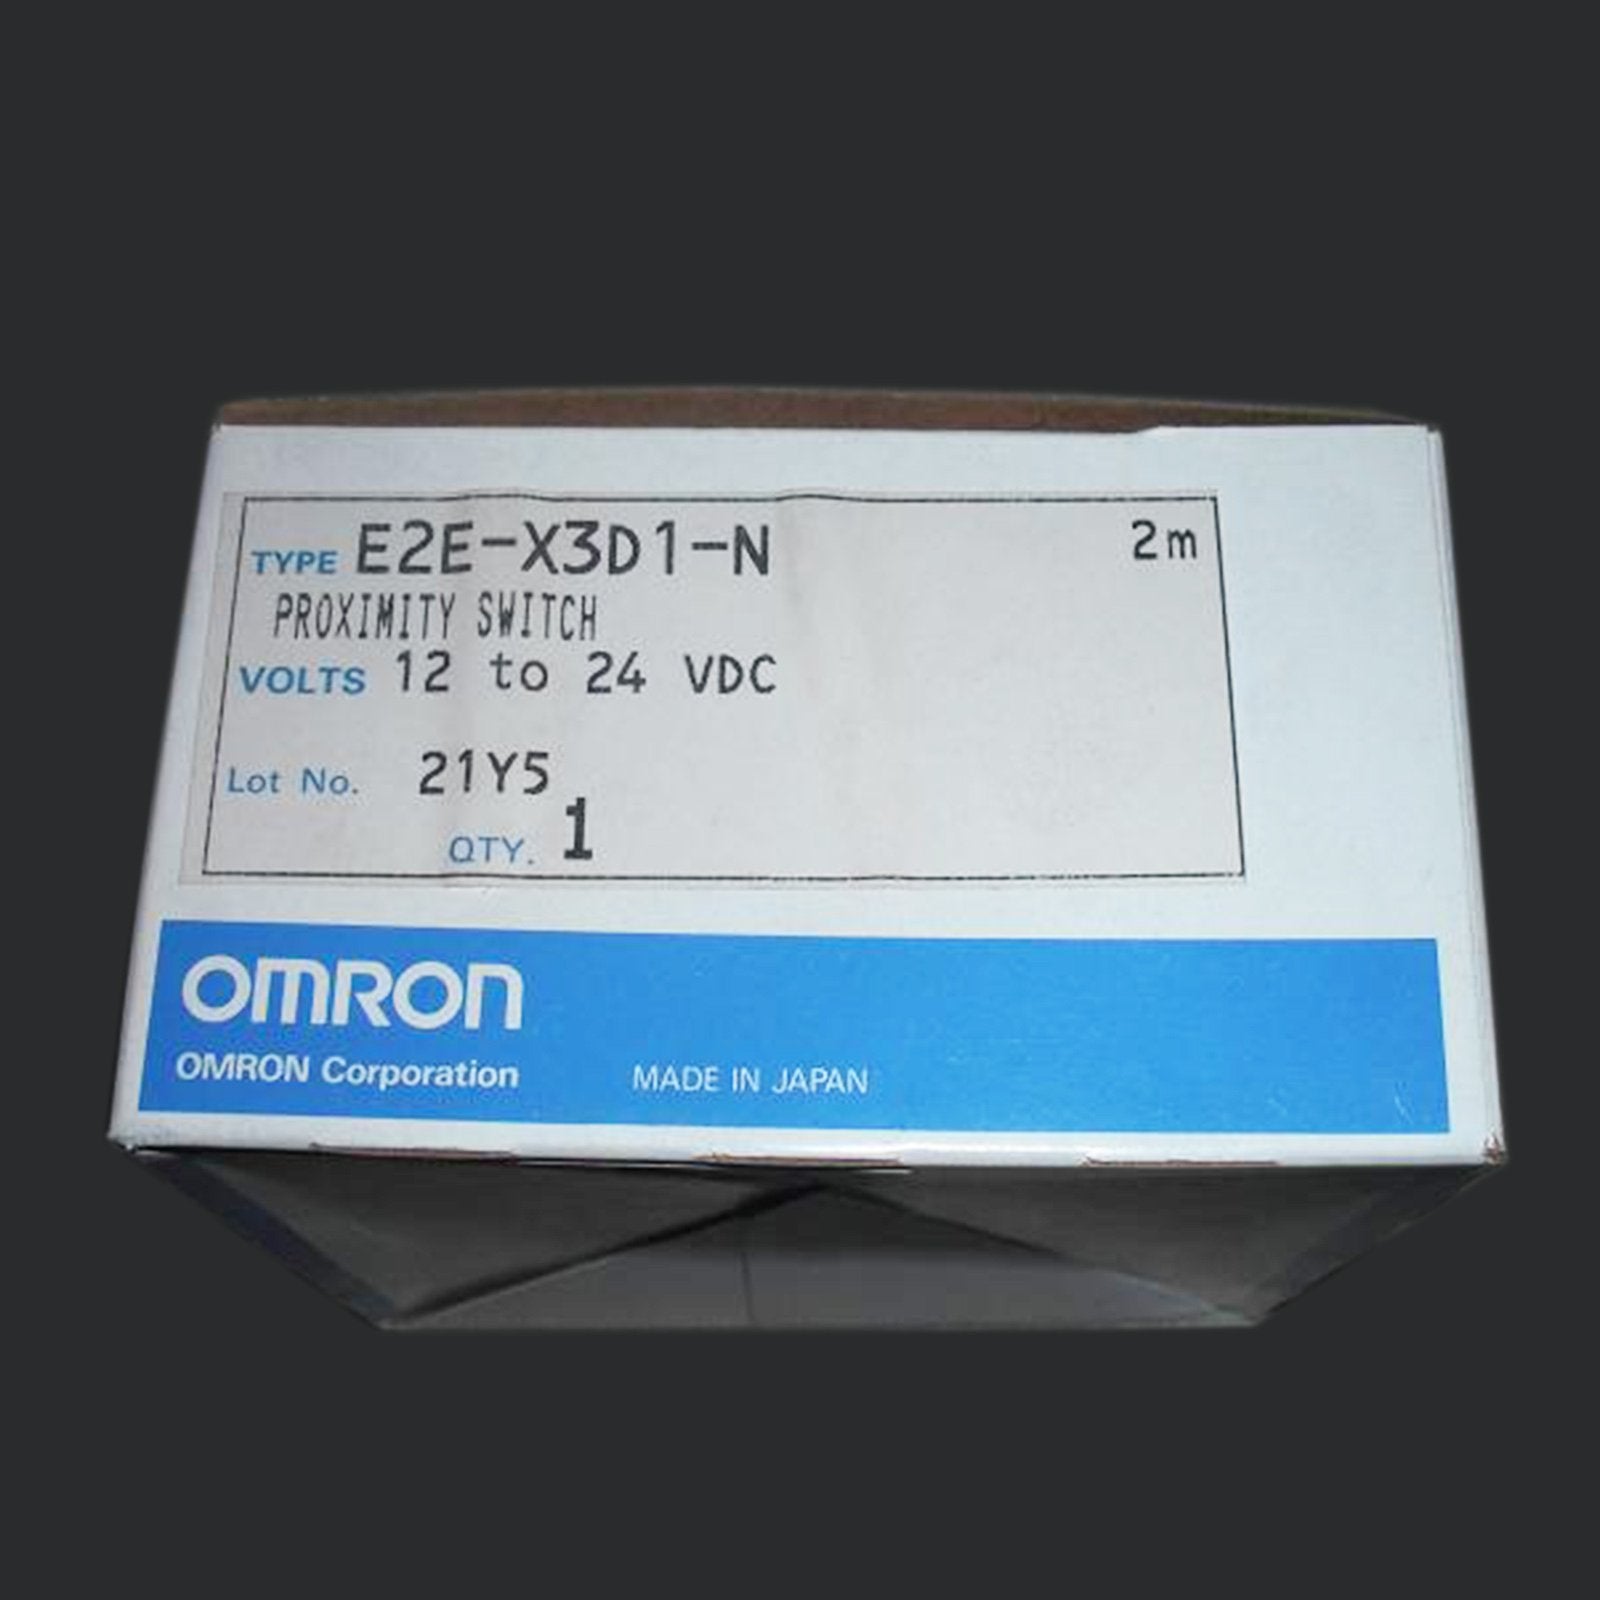 E2E-X3D1-N KOEED 101-200, 90%, import_2020_10_10_031751, Omron, Other